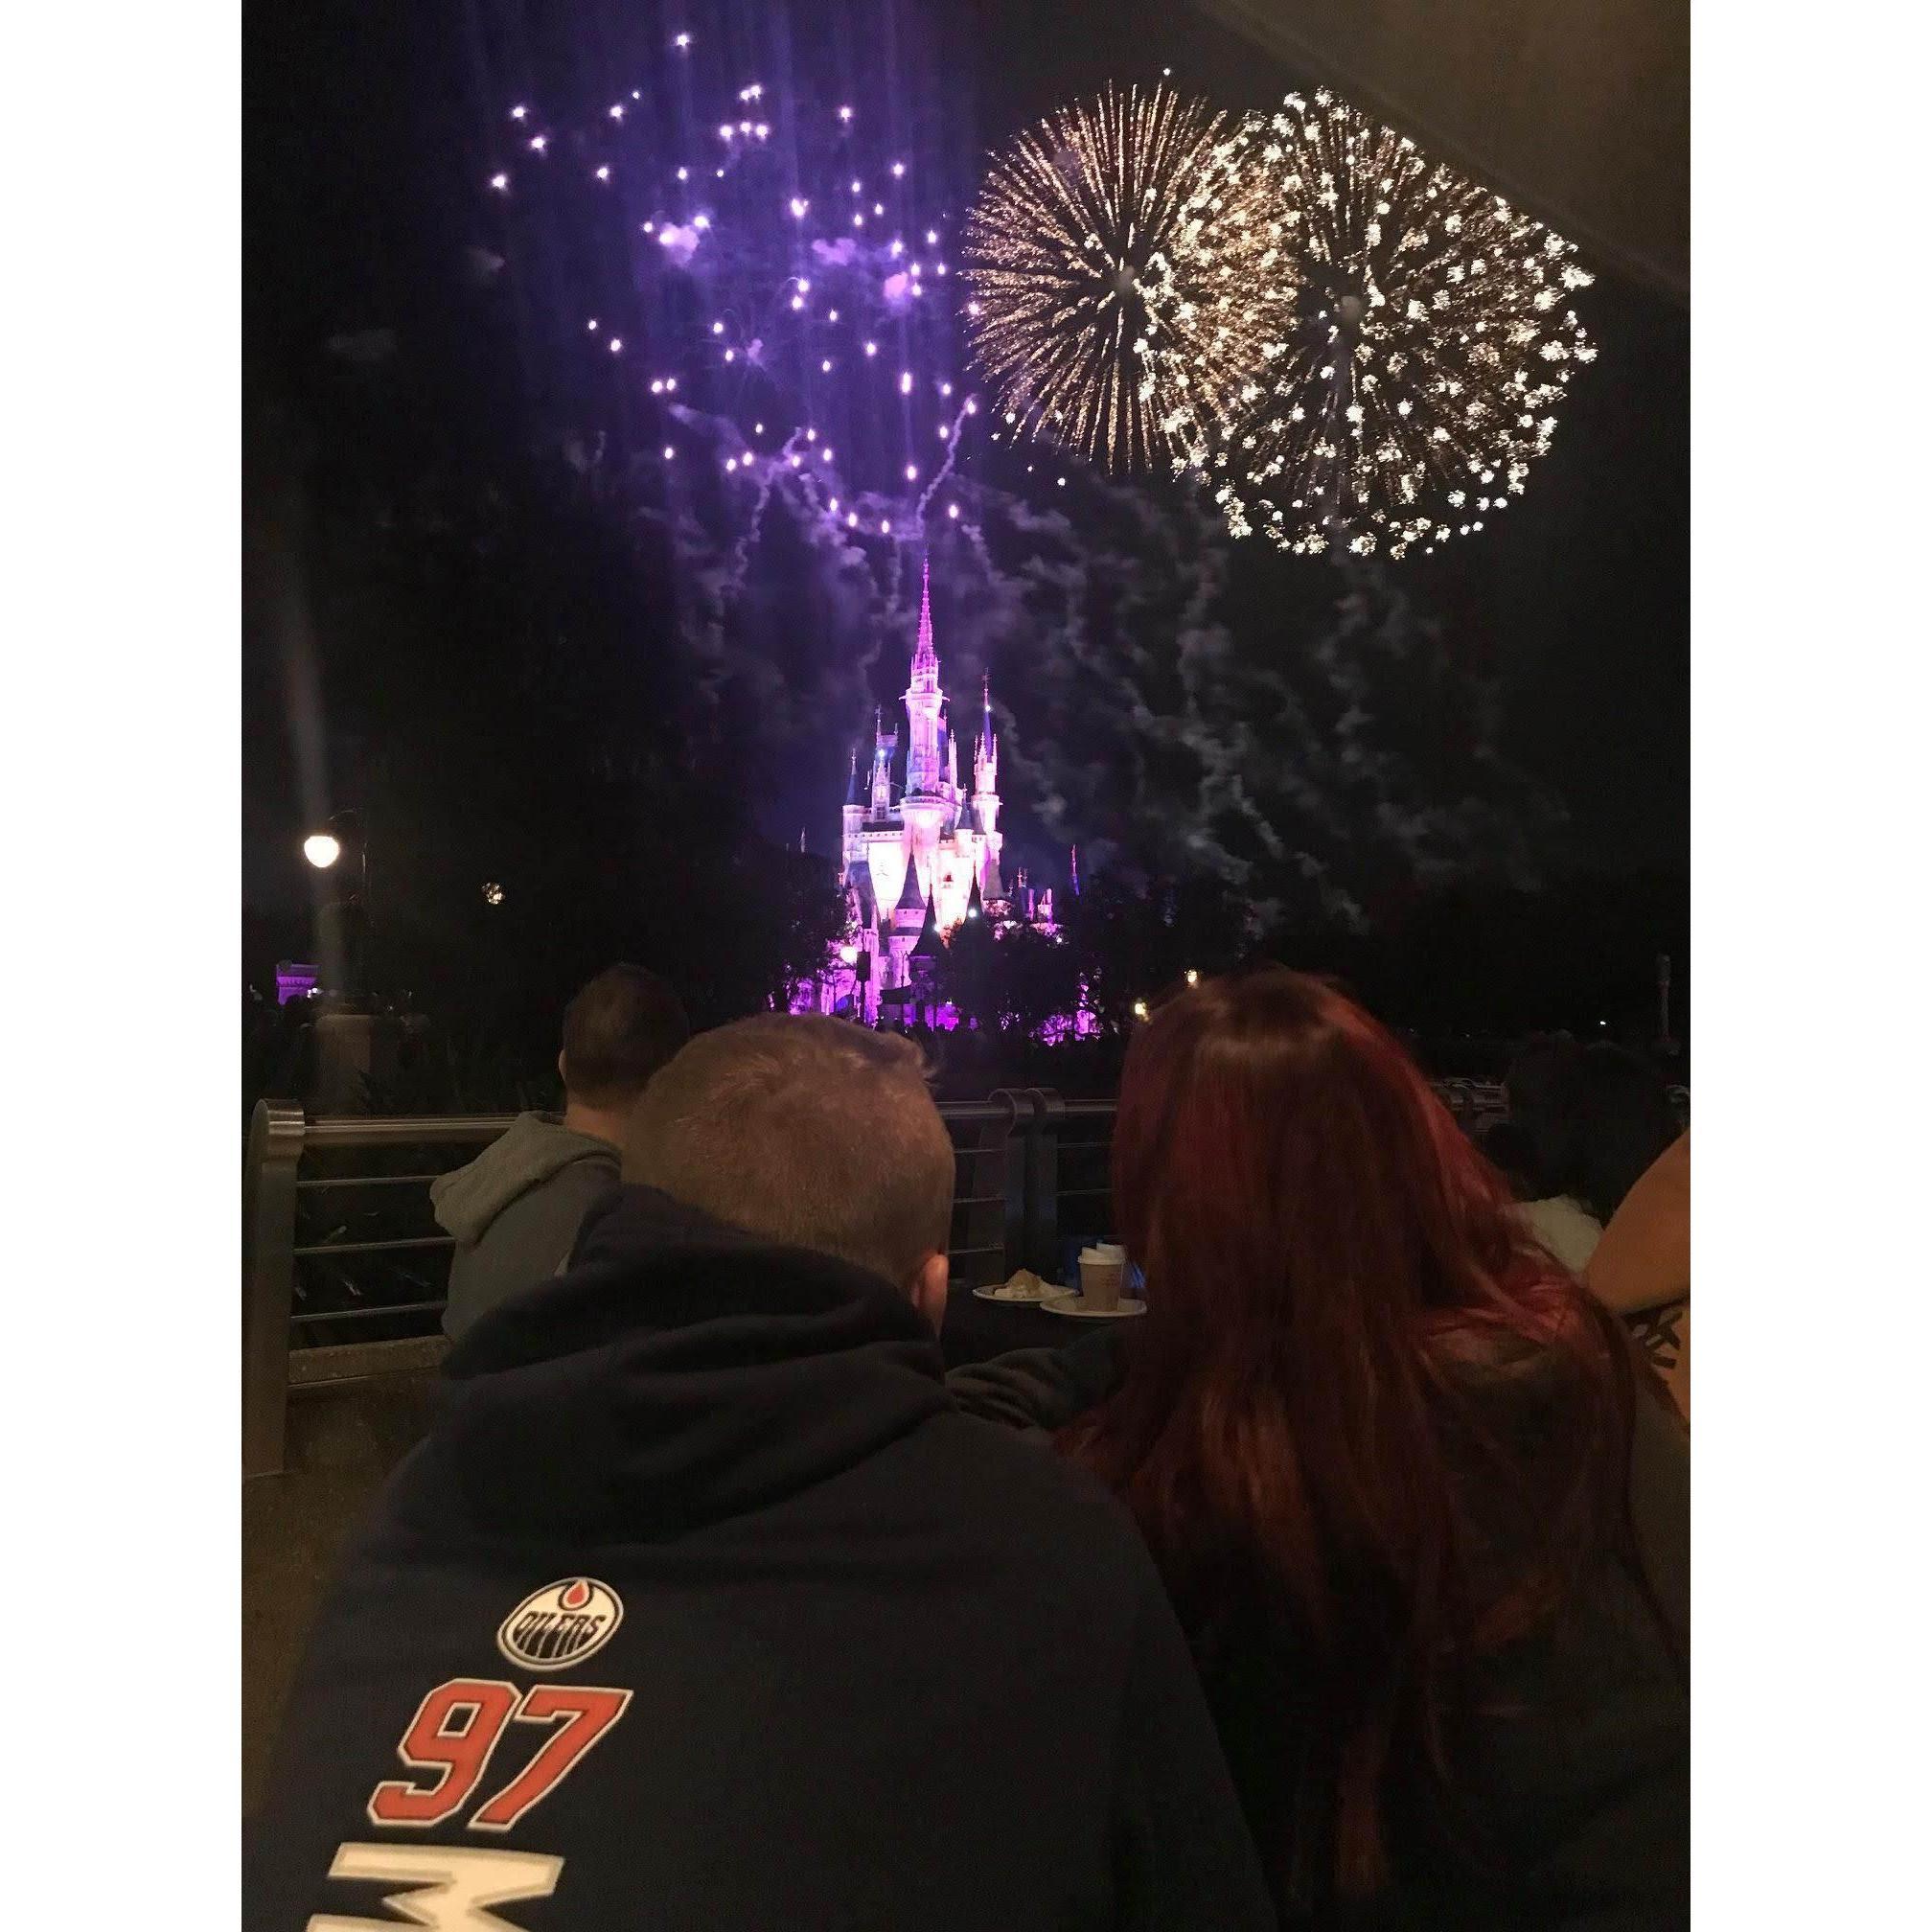 Happily Ever After!